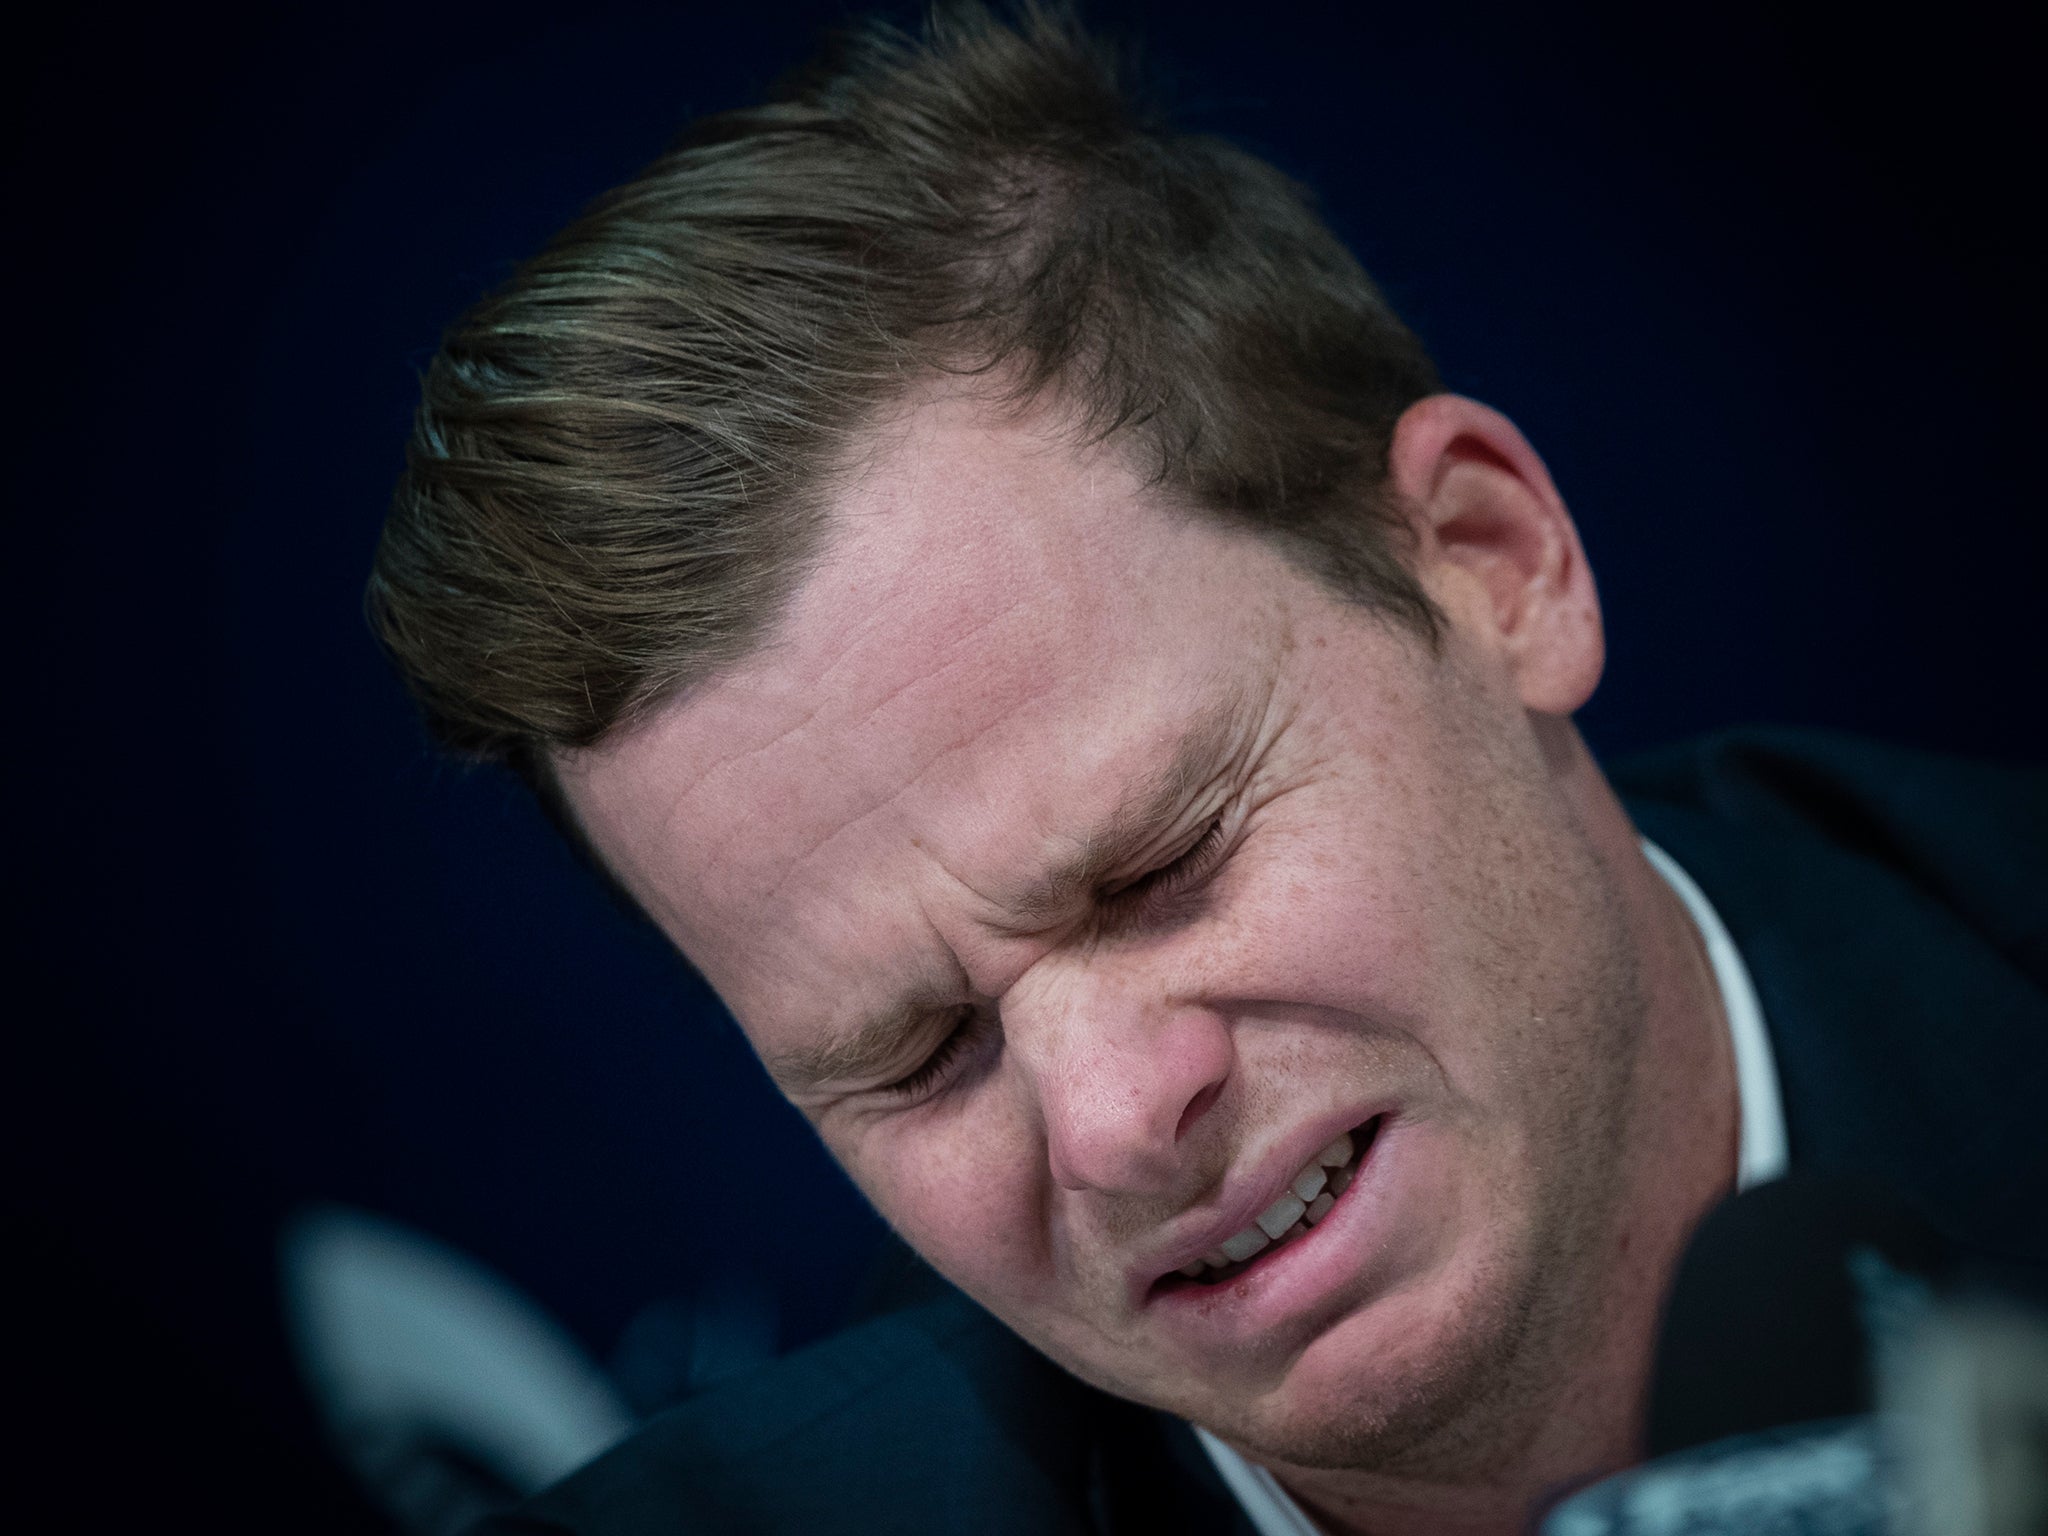 Steve Smith broke down in tears after apologising for the Australia ball-tampering scandal